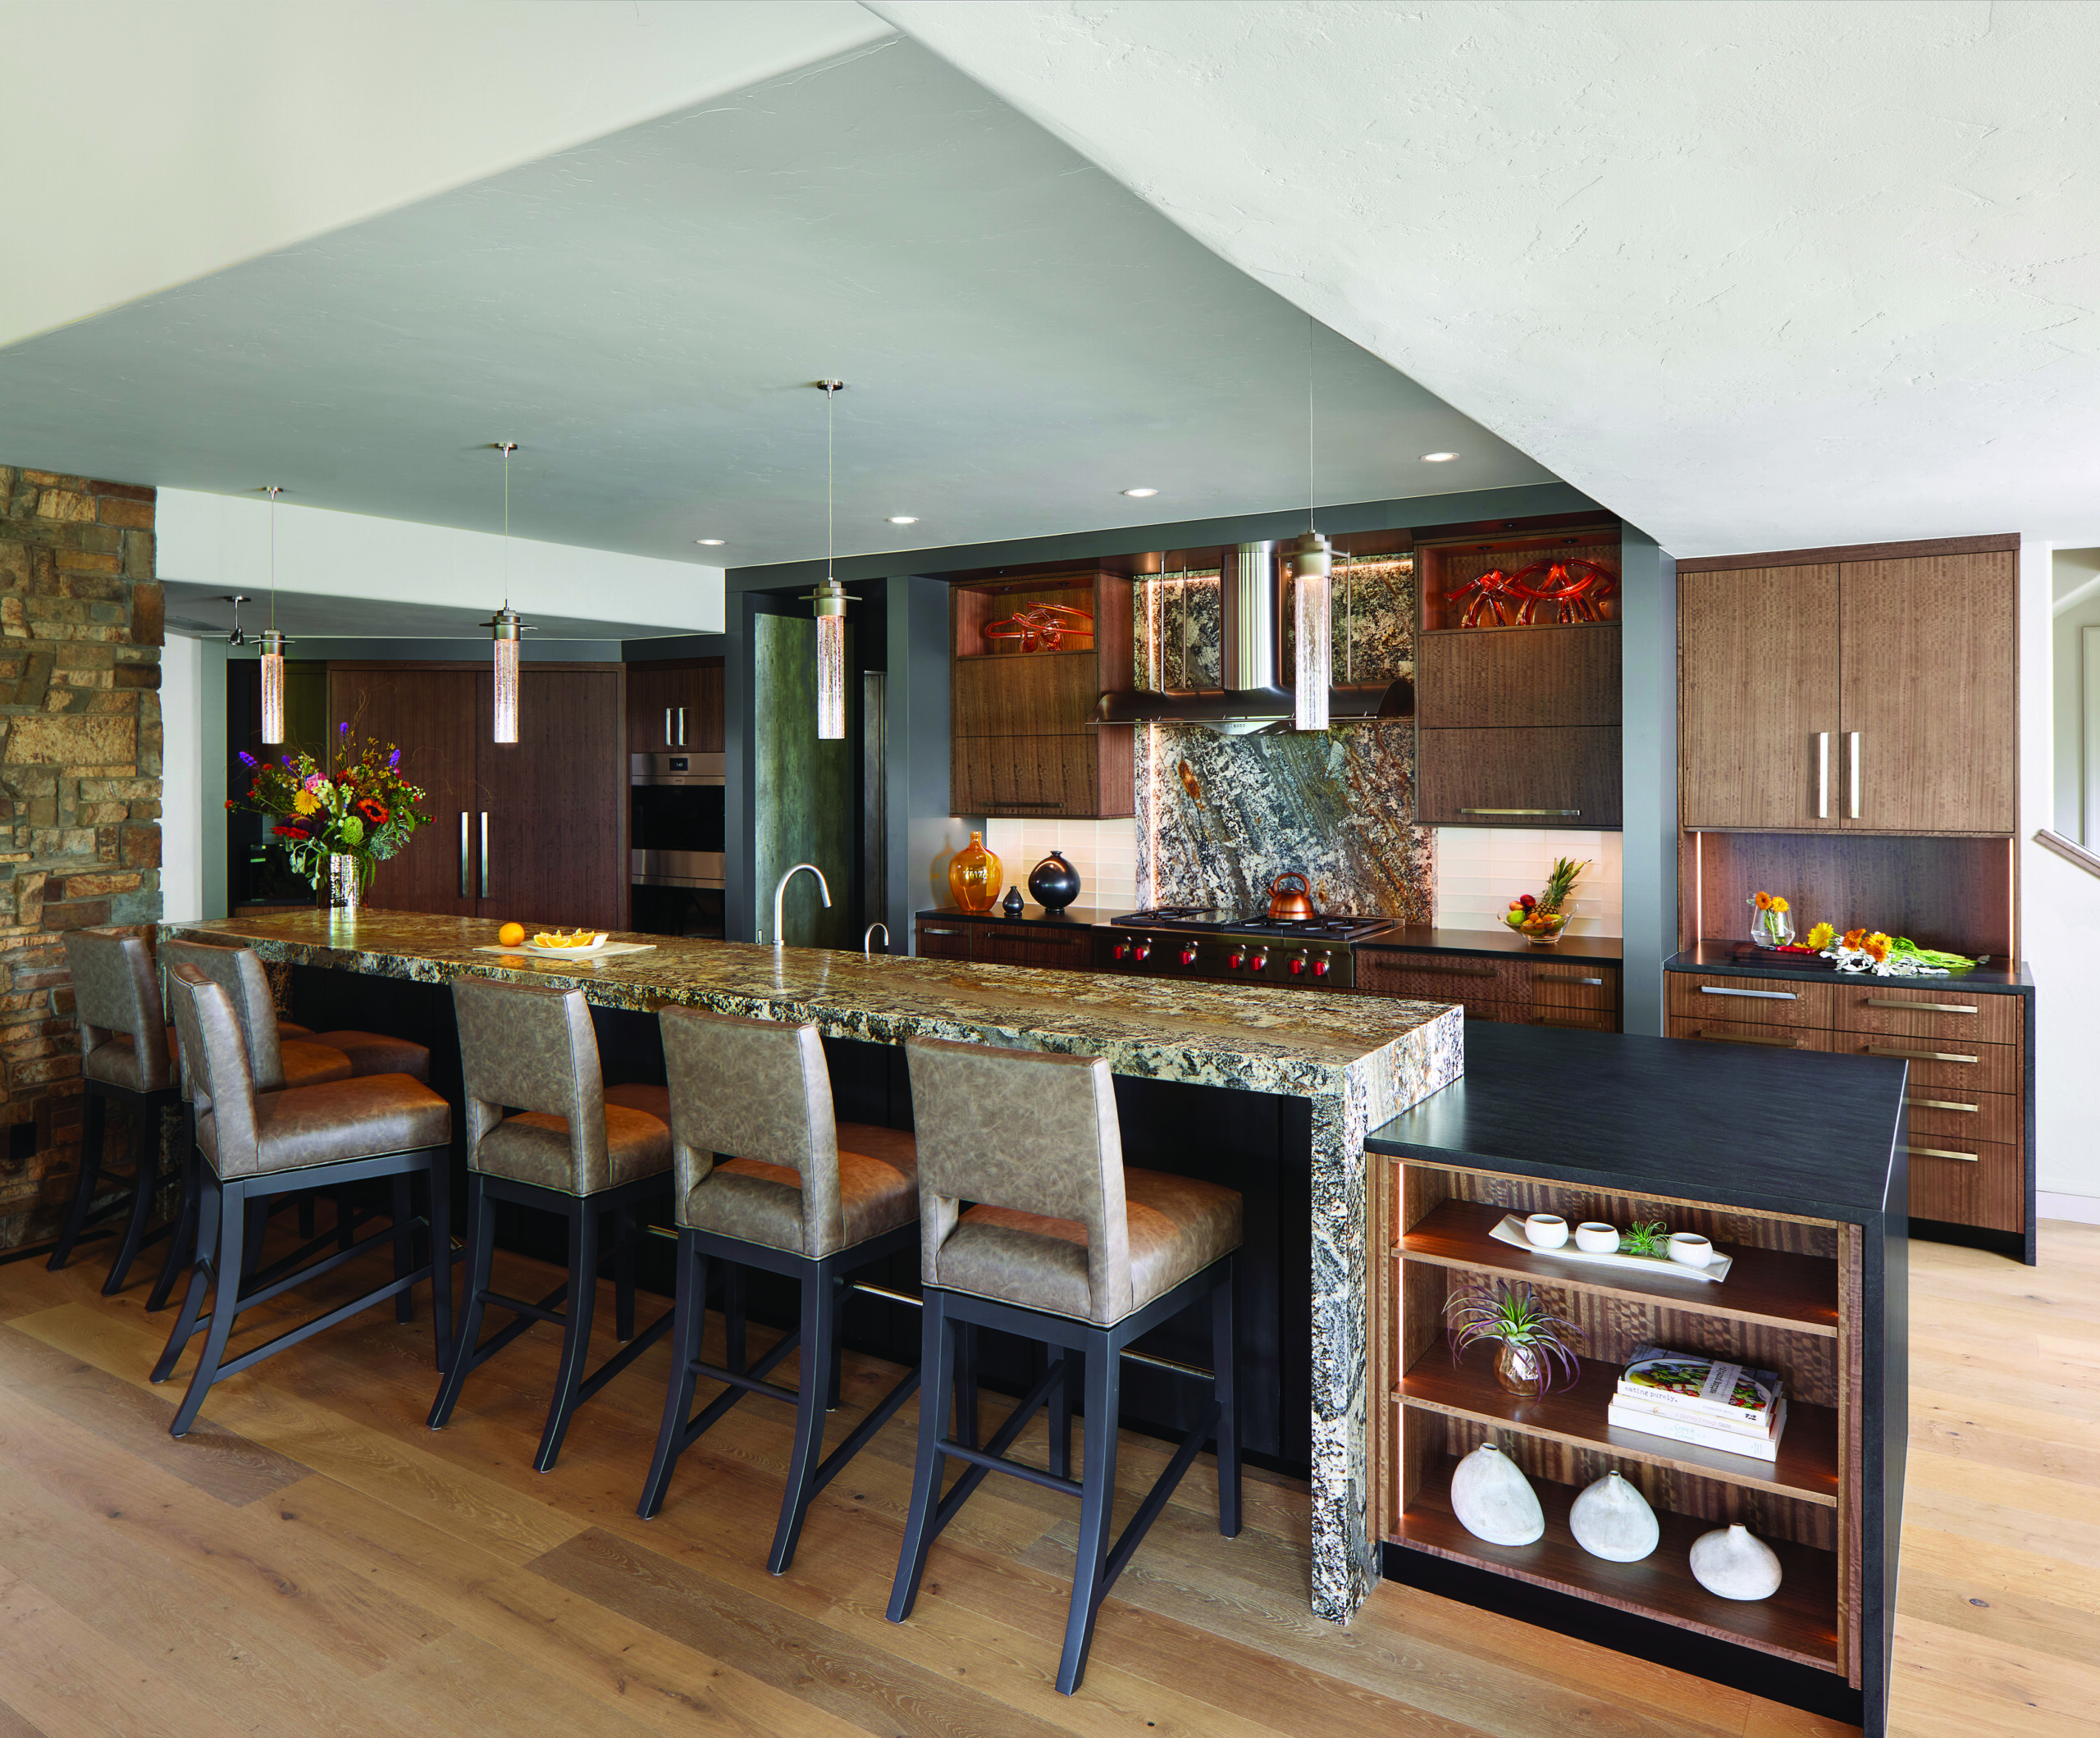 Designing your kitchen: functionality vs aesthetic - GROLLO HOMES